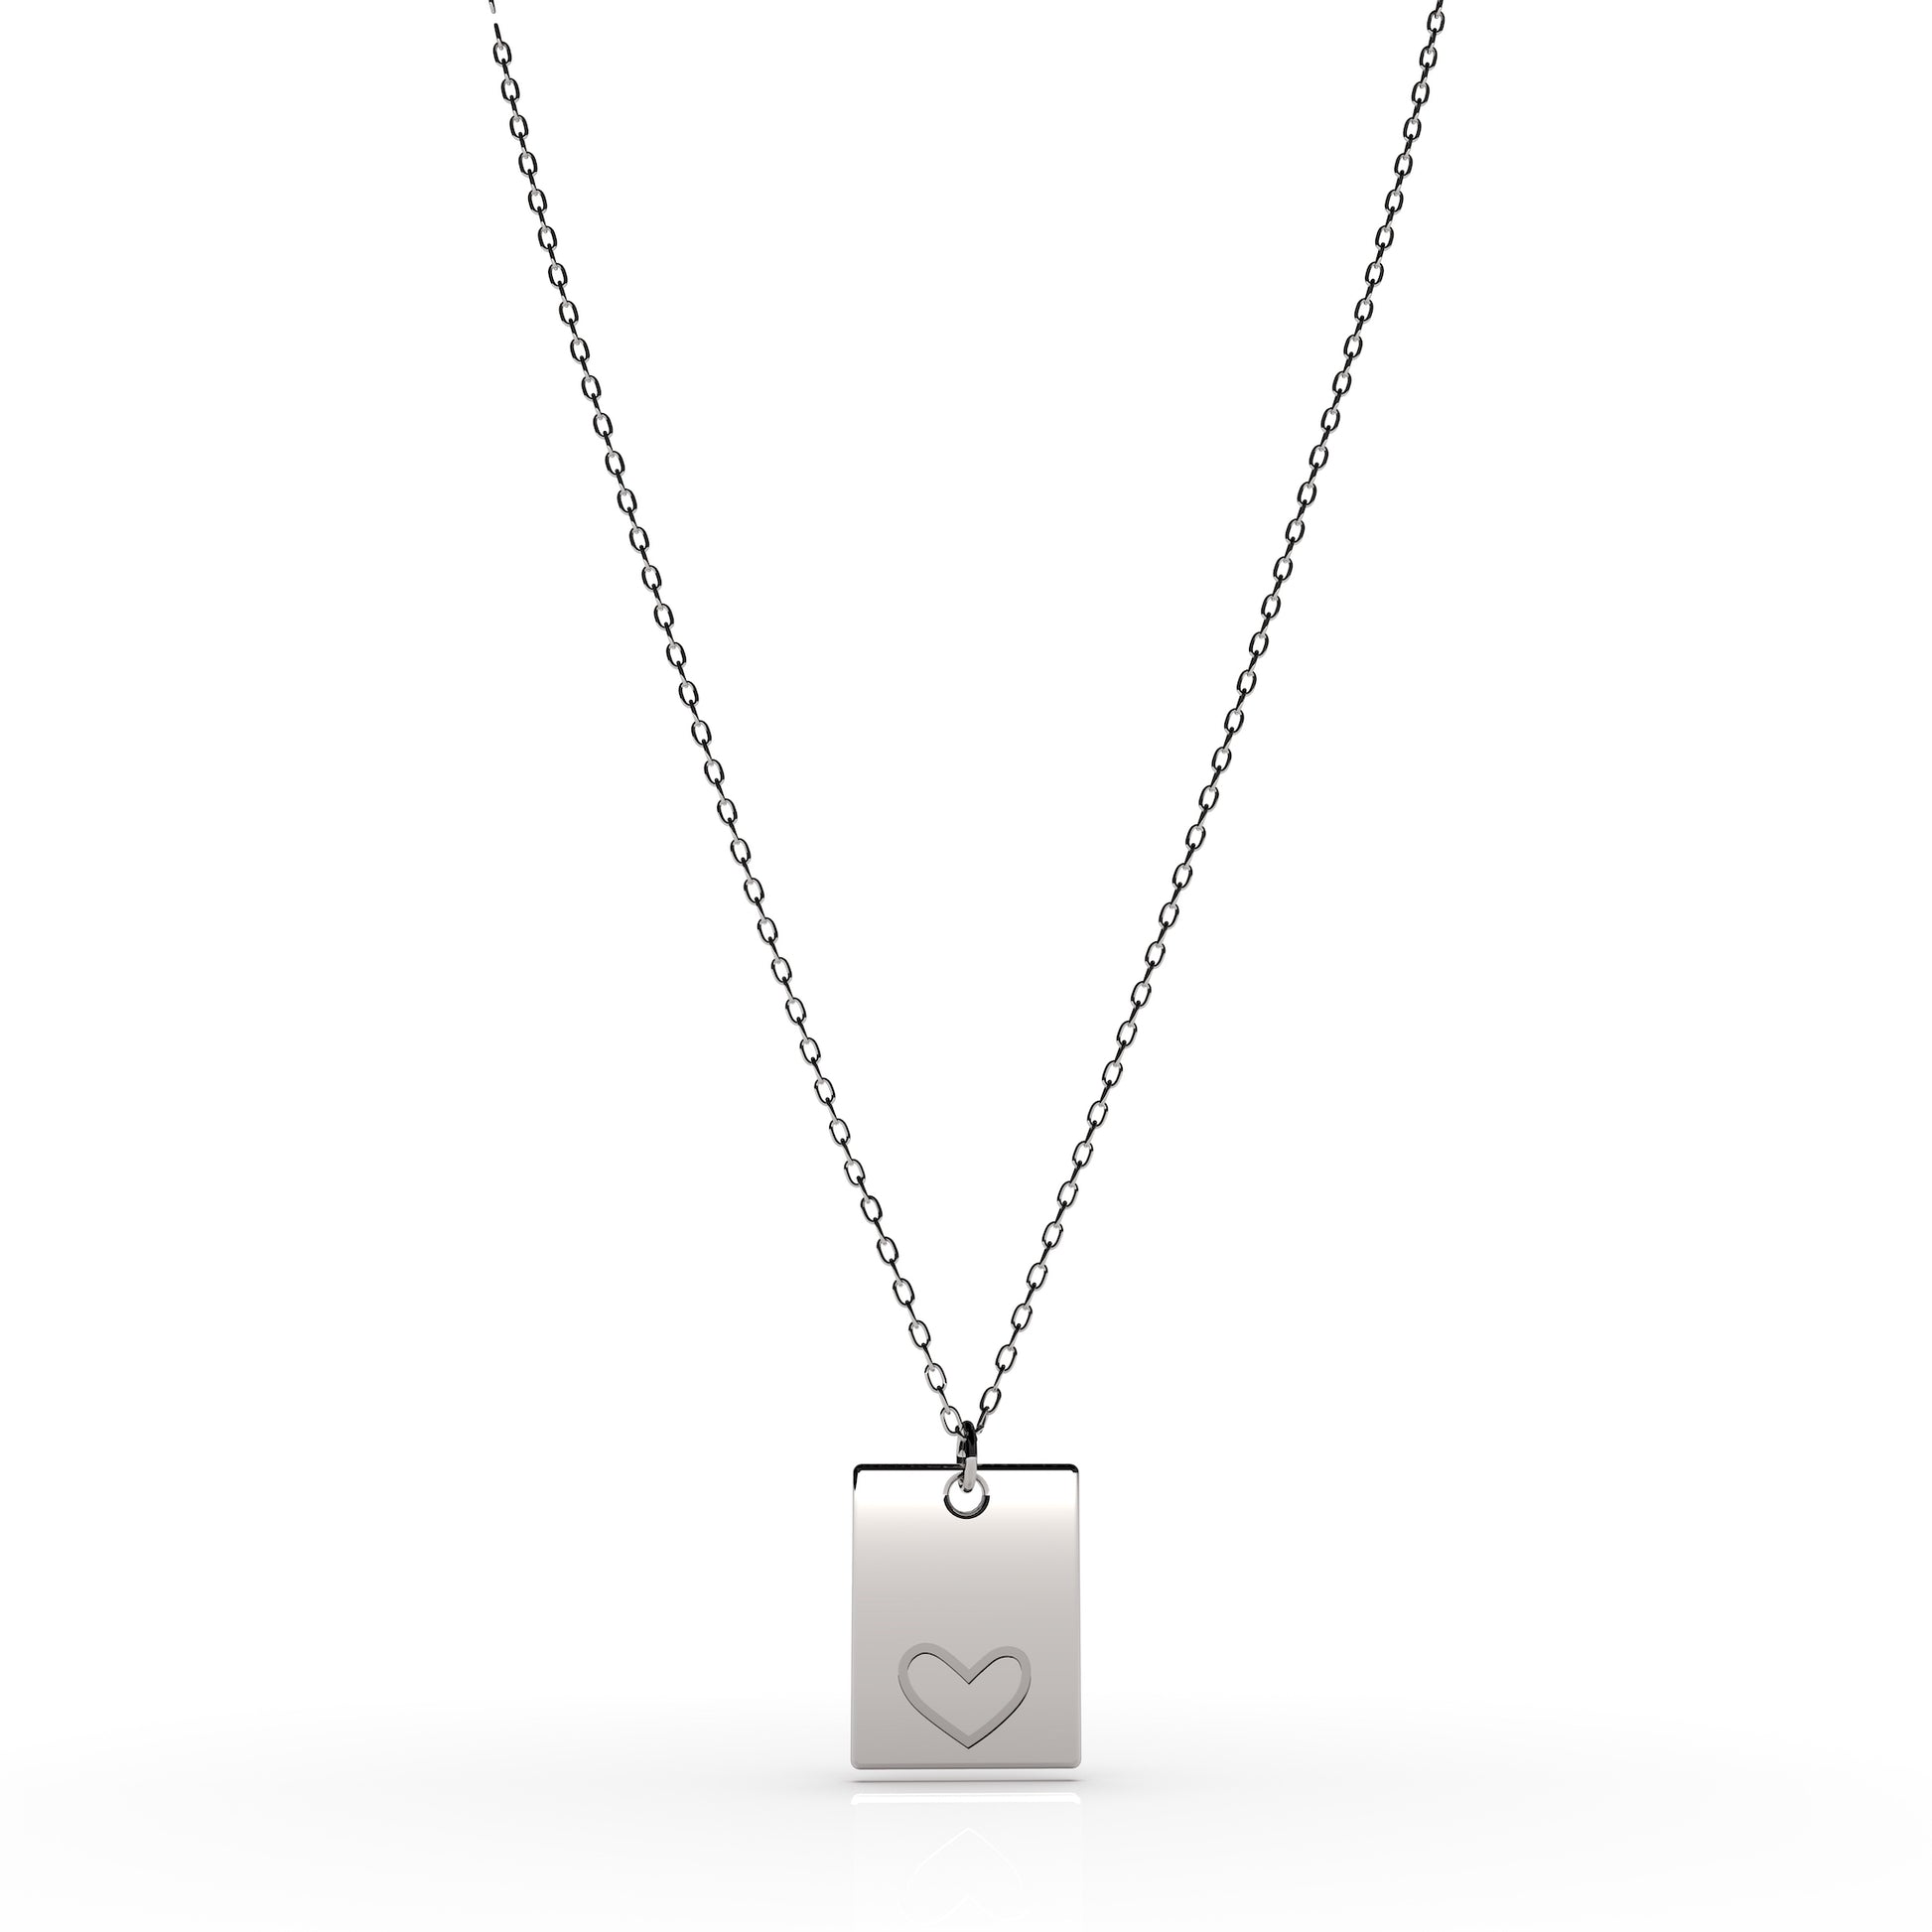 Heart Pendant Necklace | Heart Shape Necklace | The Ovl Collection